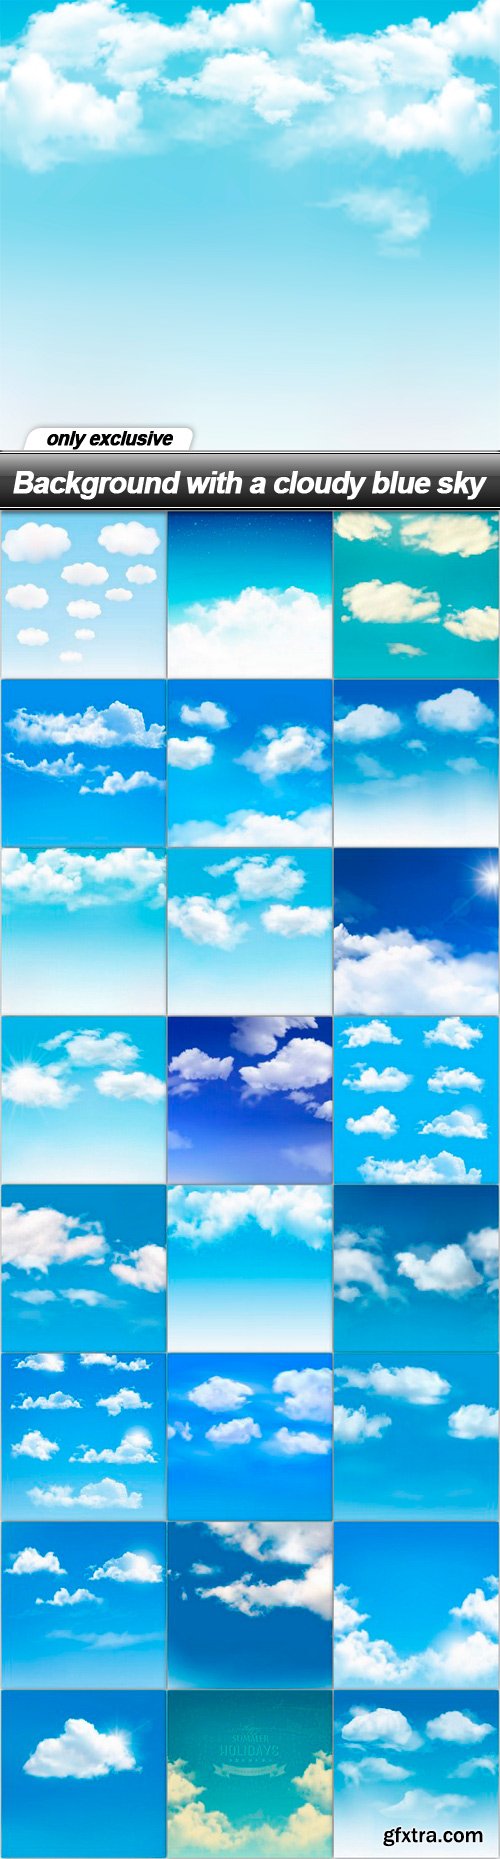 Background with a cloudy blue sky - 25 EPS